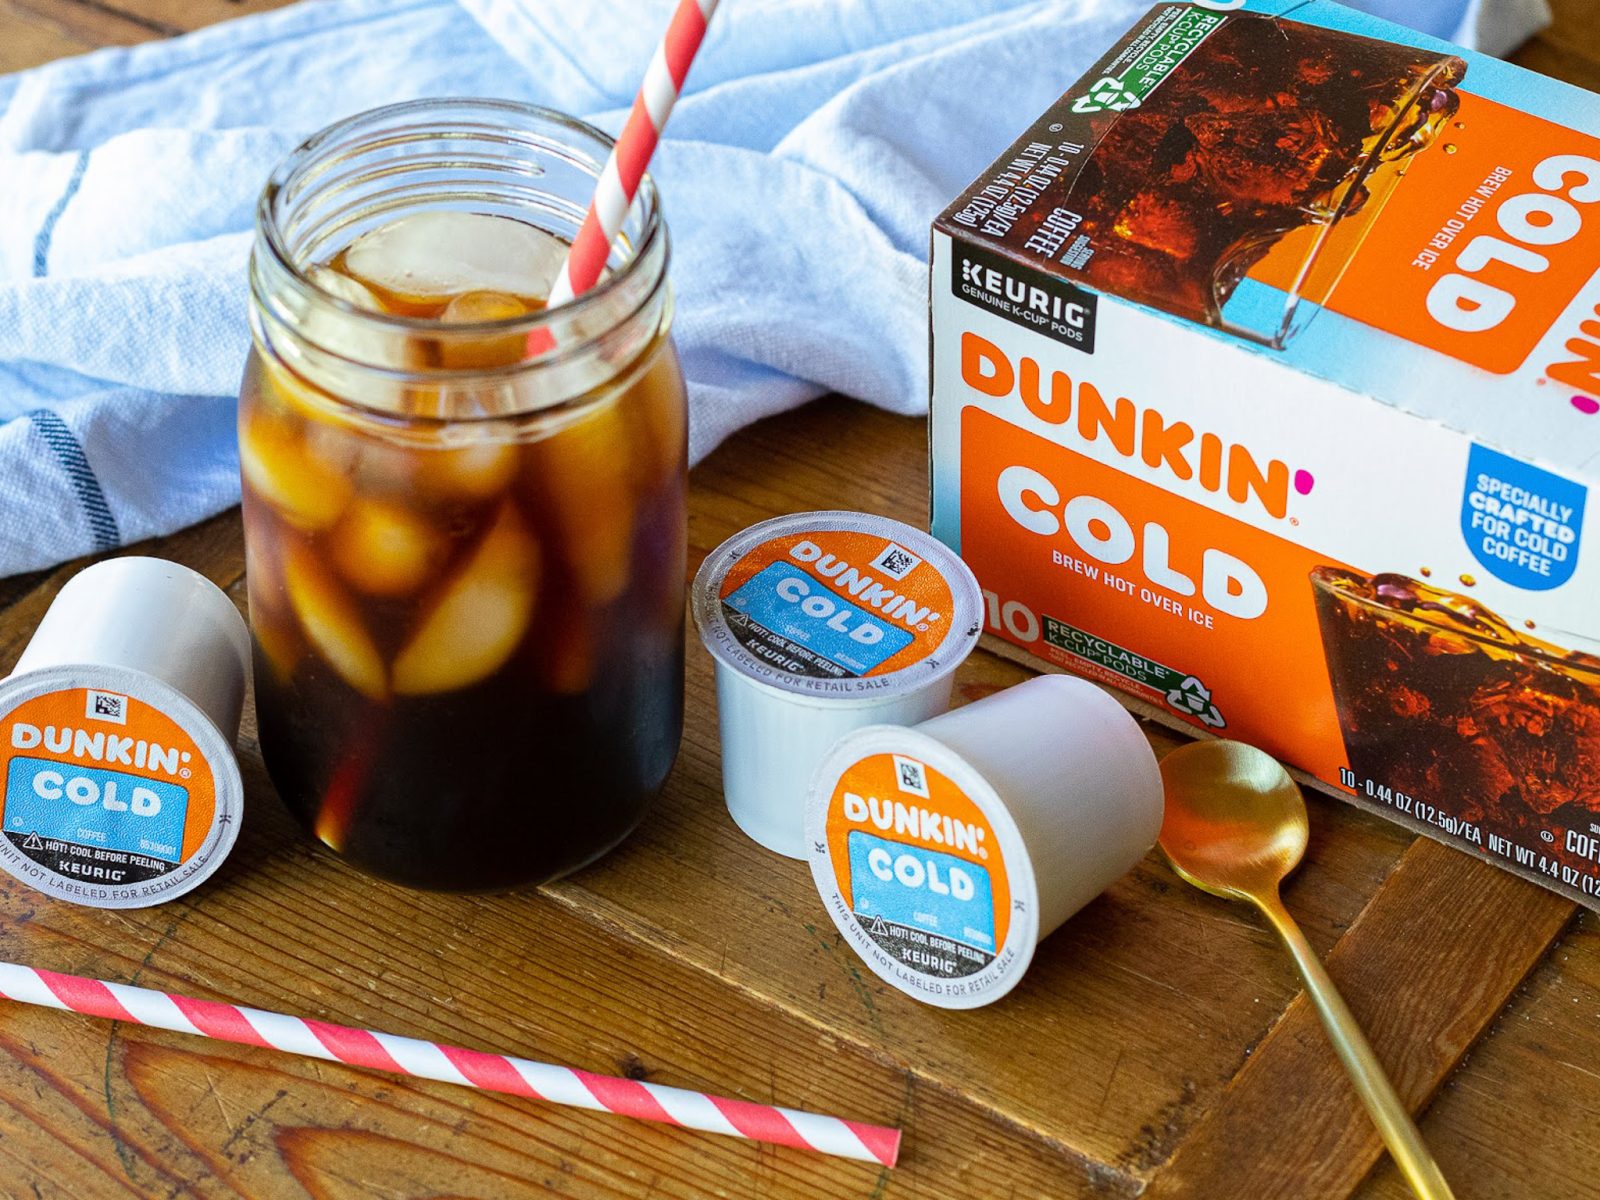 Dunkin’ Donuts Cold Coffee Products Just $2.49 At Publix (Regular Price $9.99)